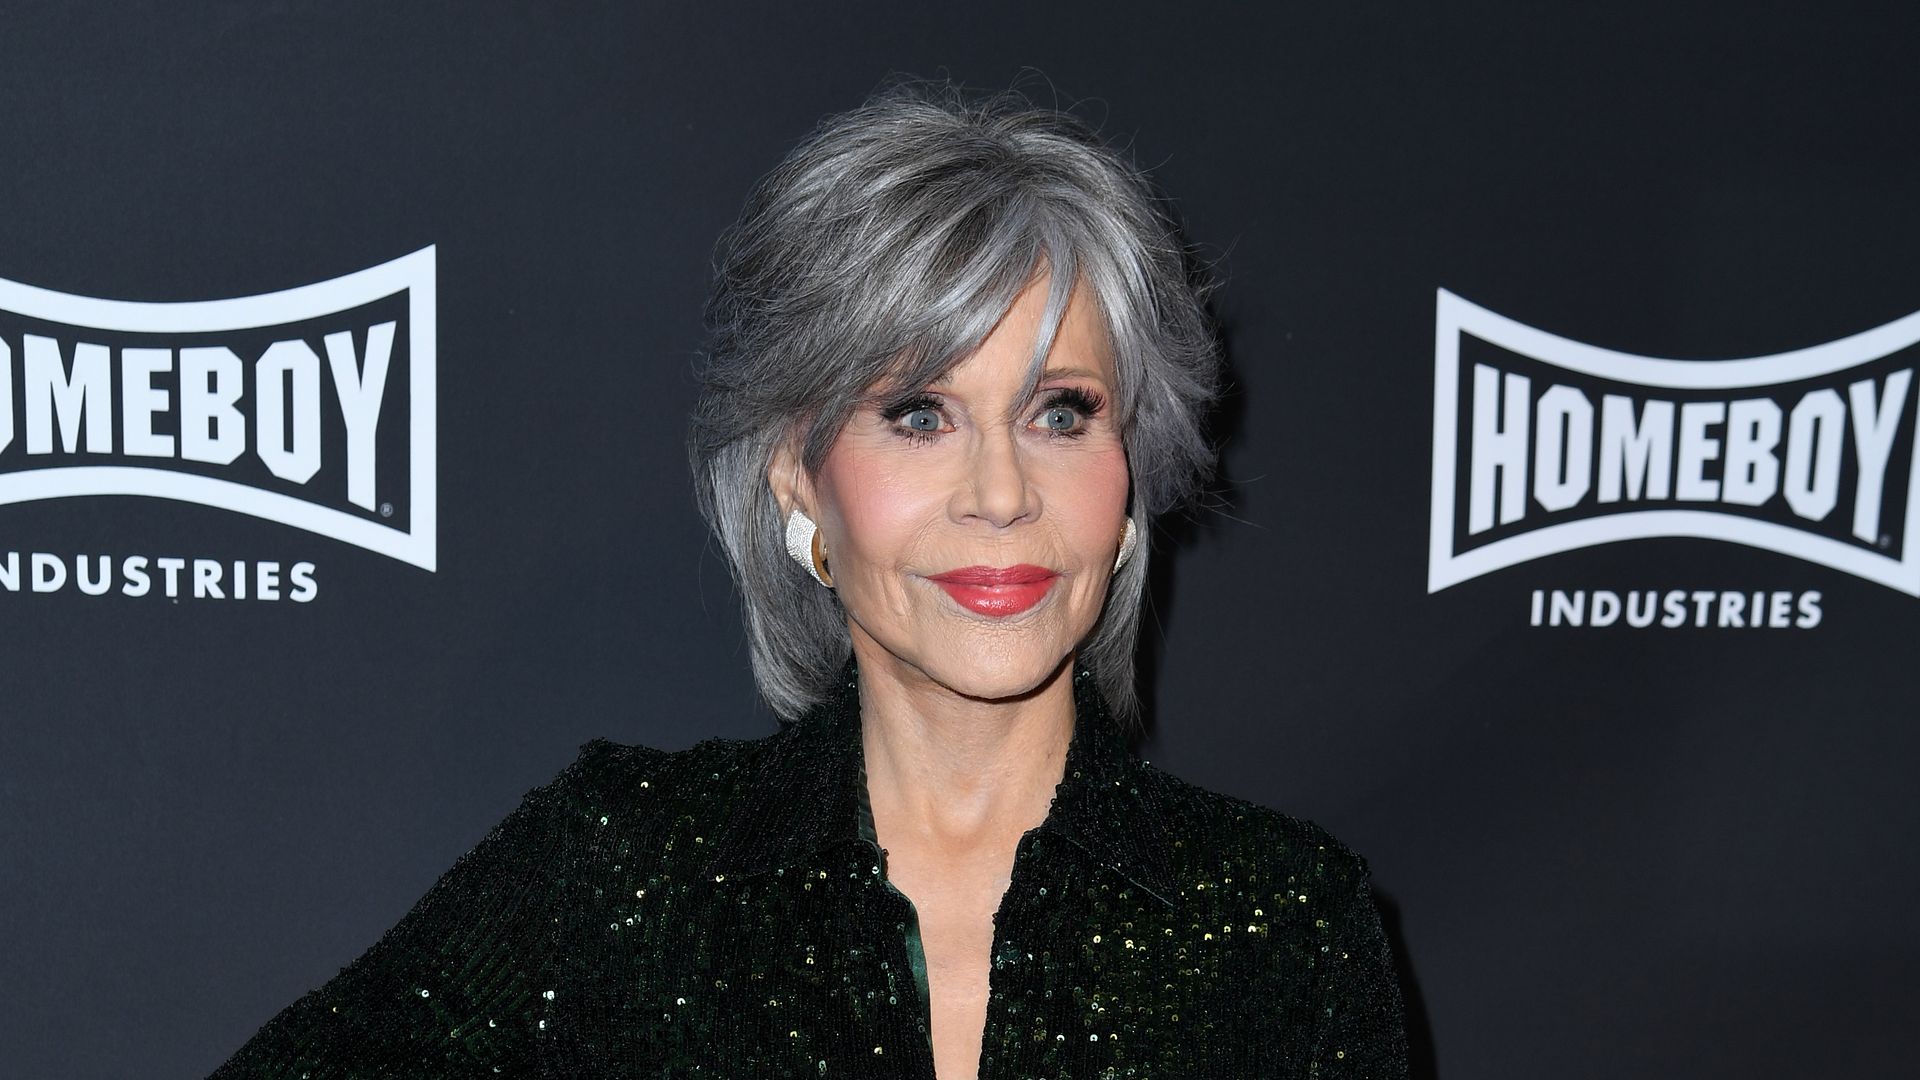 Jane FondaJane Fonda attends Homeboy Industries' 2023 Lo Maximo Awards and Fundraising Gala at JW Marriott Los Angeles L.A. LIVE on April 29, 2023 in Los Angeles, California